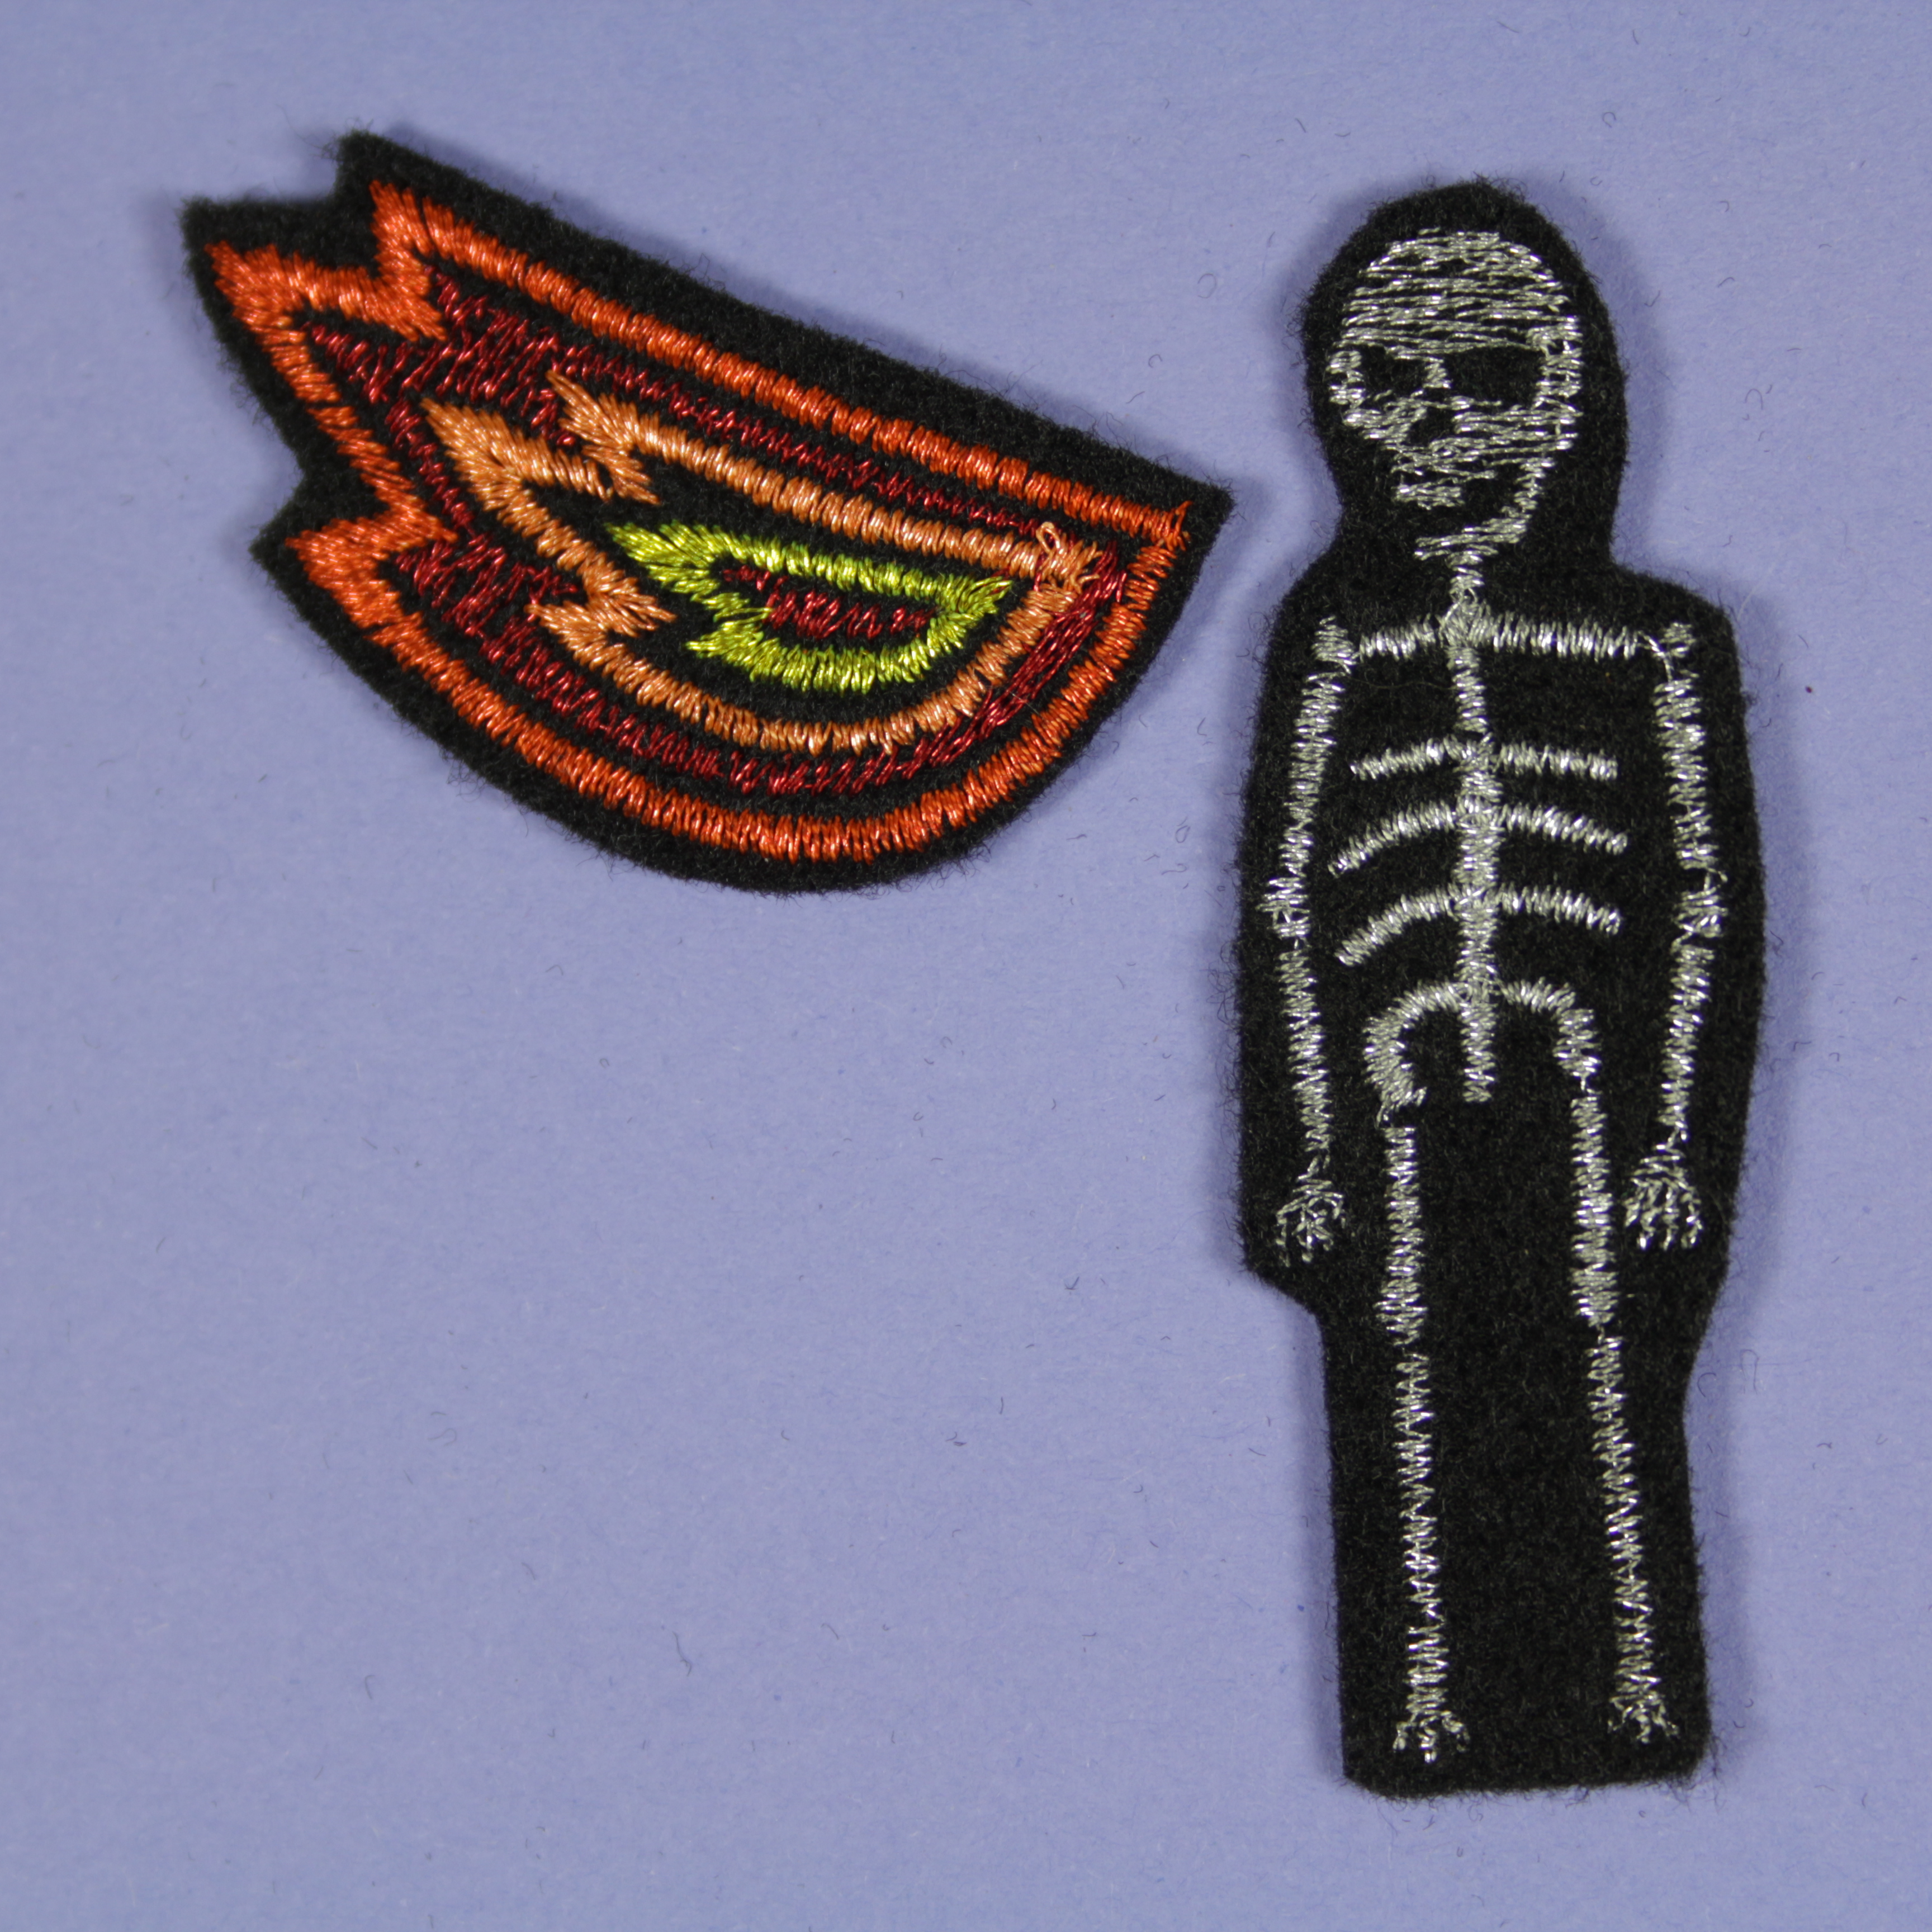 Iron-on image skeleton glitter patch with fire patch bone iron-on silver black skull flame